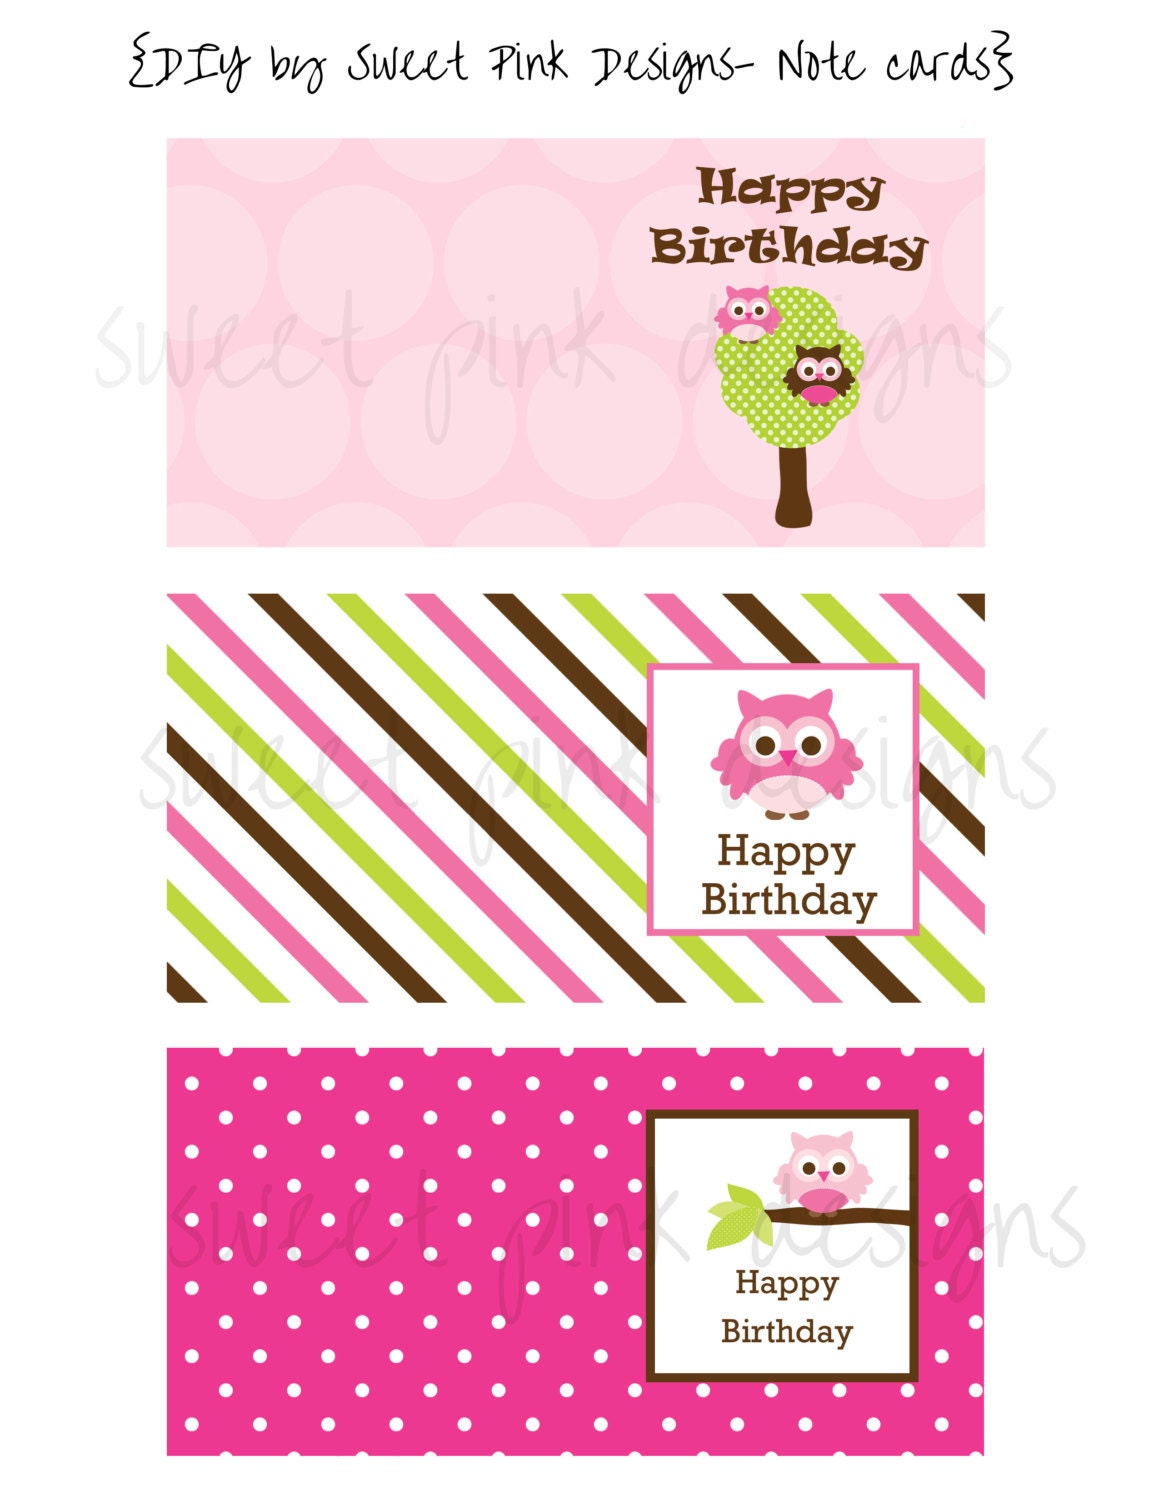 mini-birthday-cards-printable-note-cards-etsy